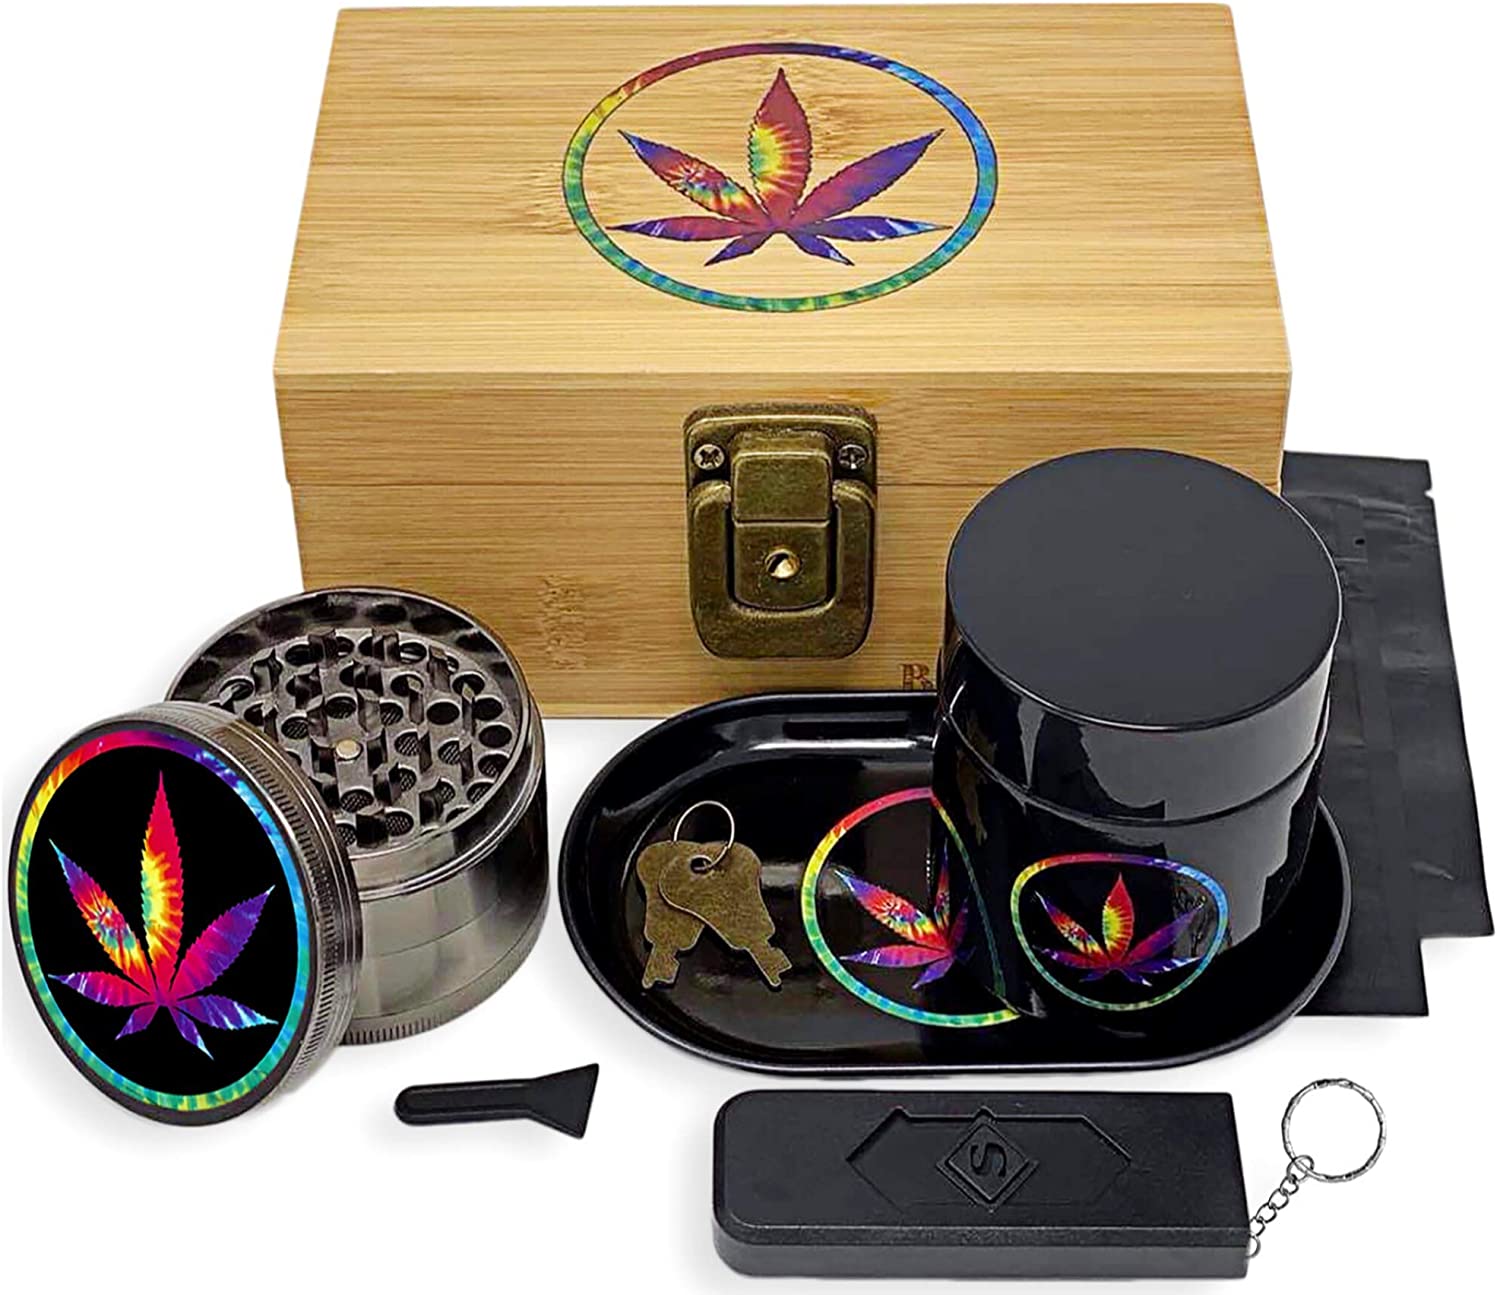 25+ Weed Stash Boxes to Securely Store Cannabis (UPDATED) · Marijuana